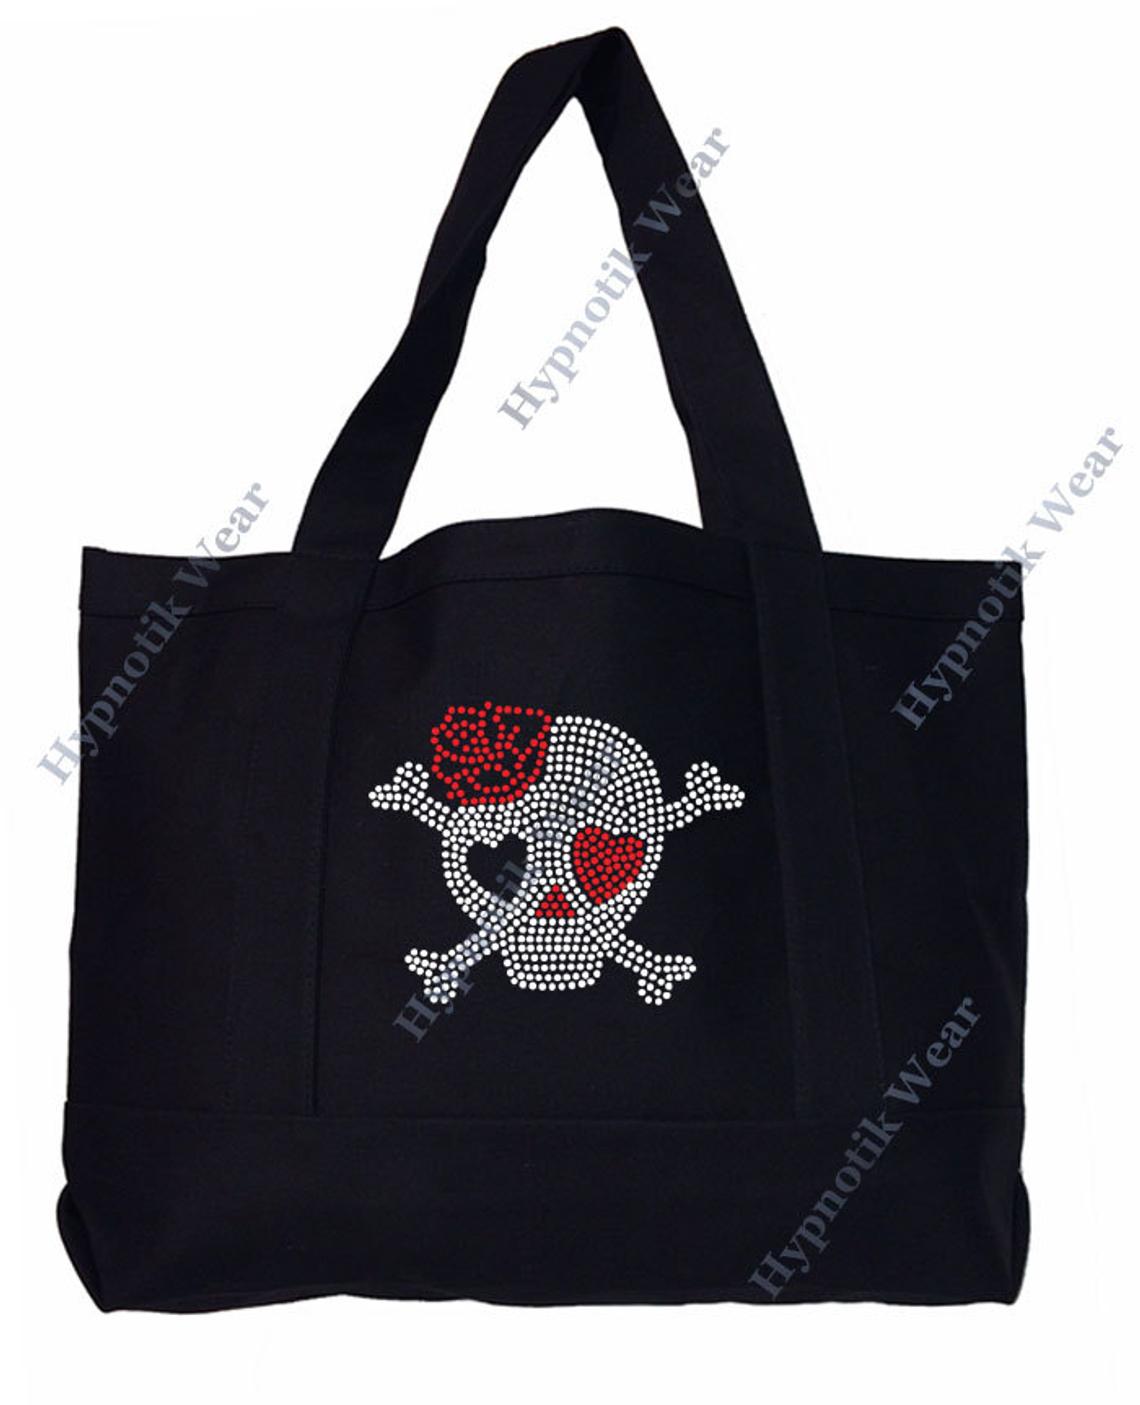 Rhinestone Sturdy Tote Bag with Zipper & Front Pocket " Skull with Rose " in Various Color, Bling